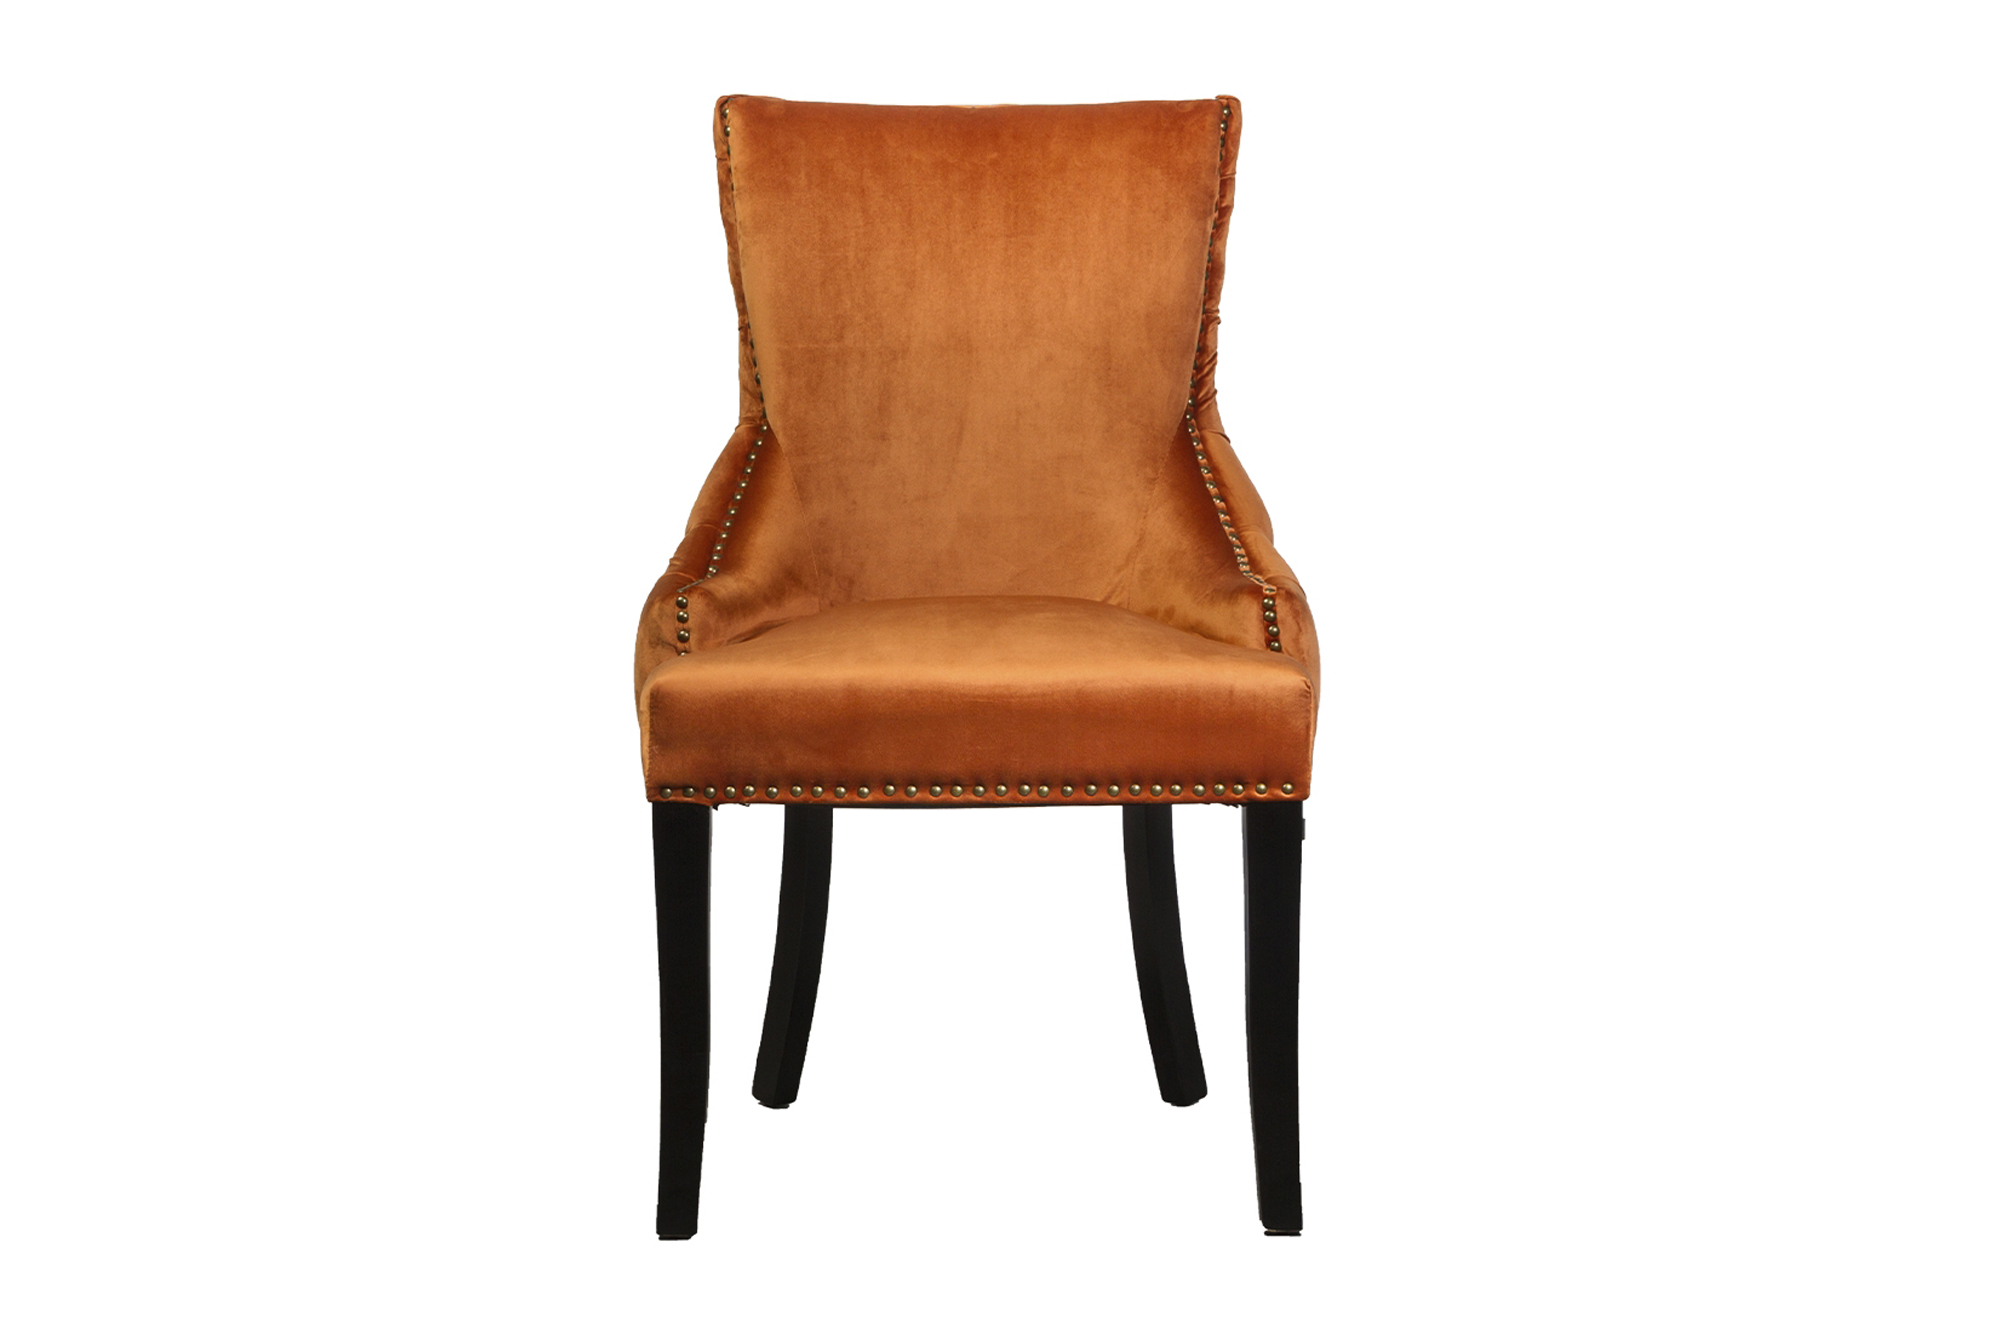 Camille Dining Chair Orange